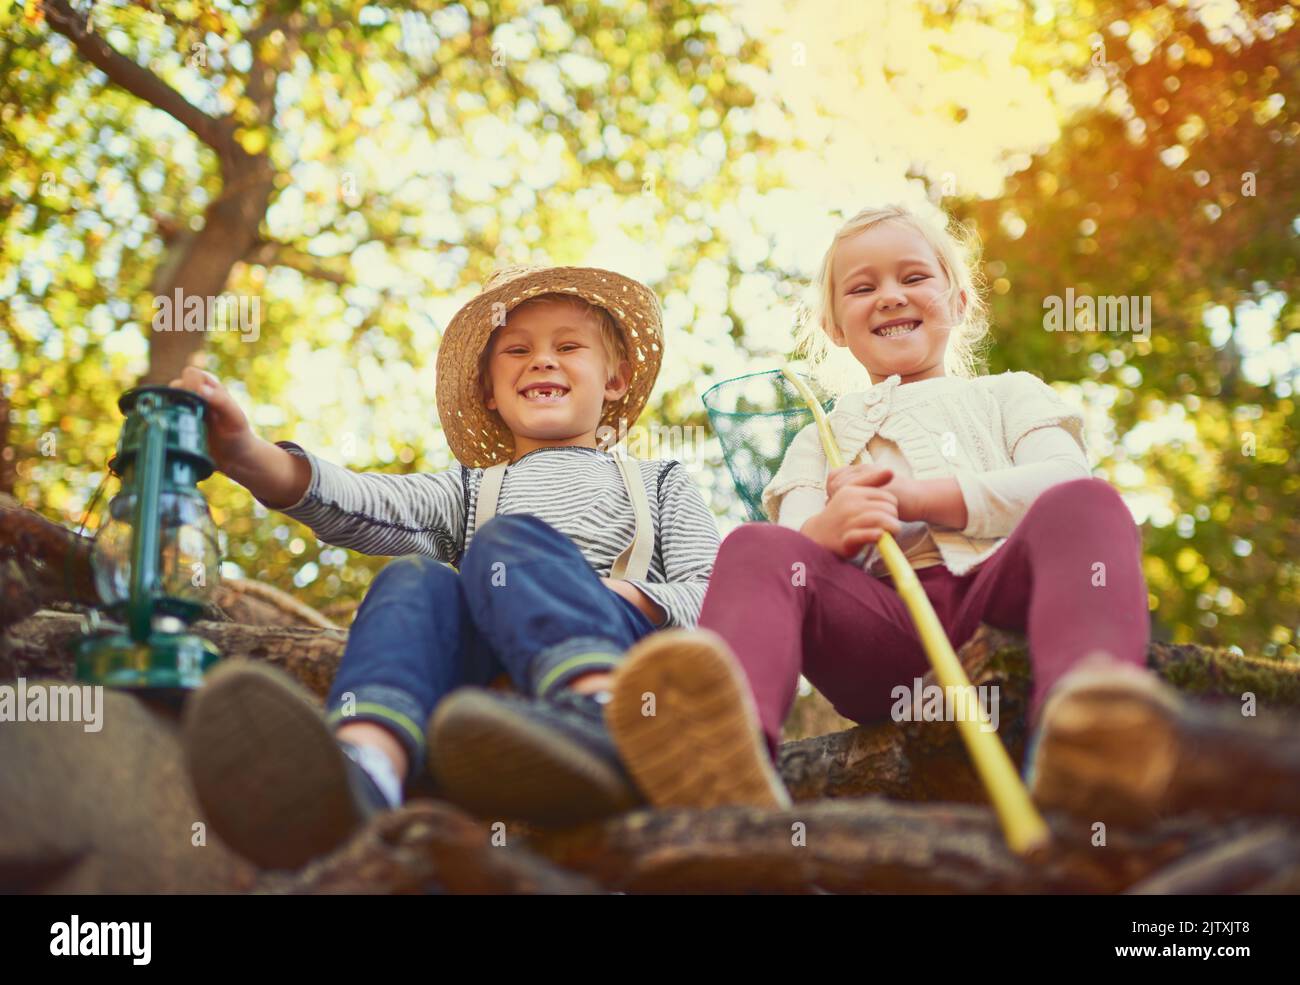 Out for an adventure together. Portrait of two little children playing together outdoors. Stock Photo